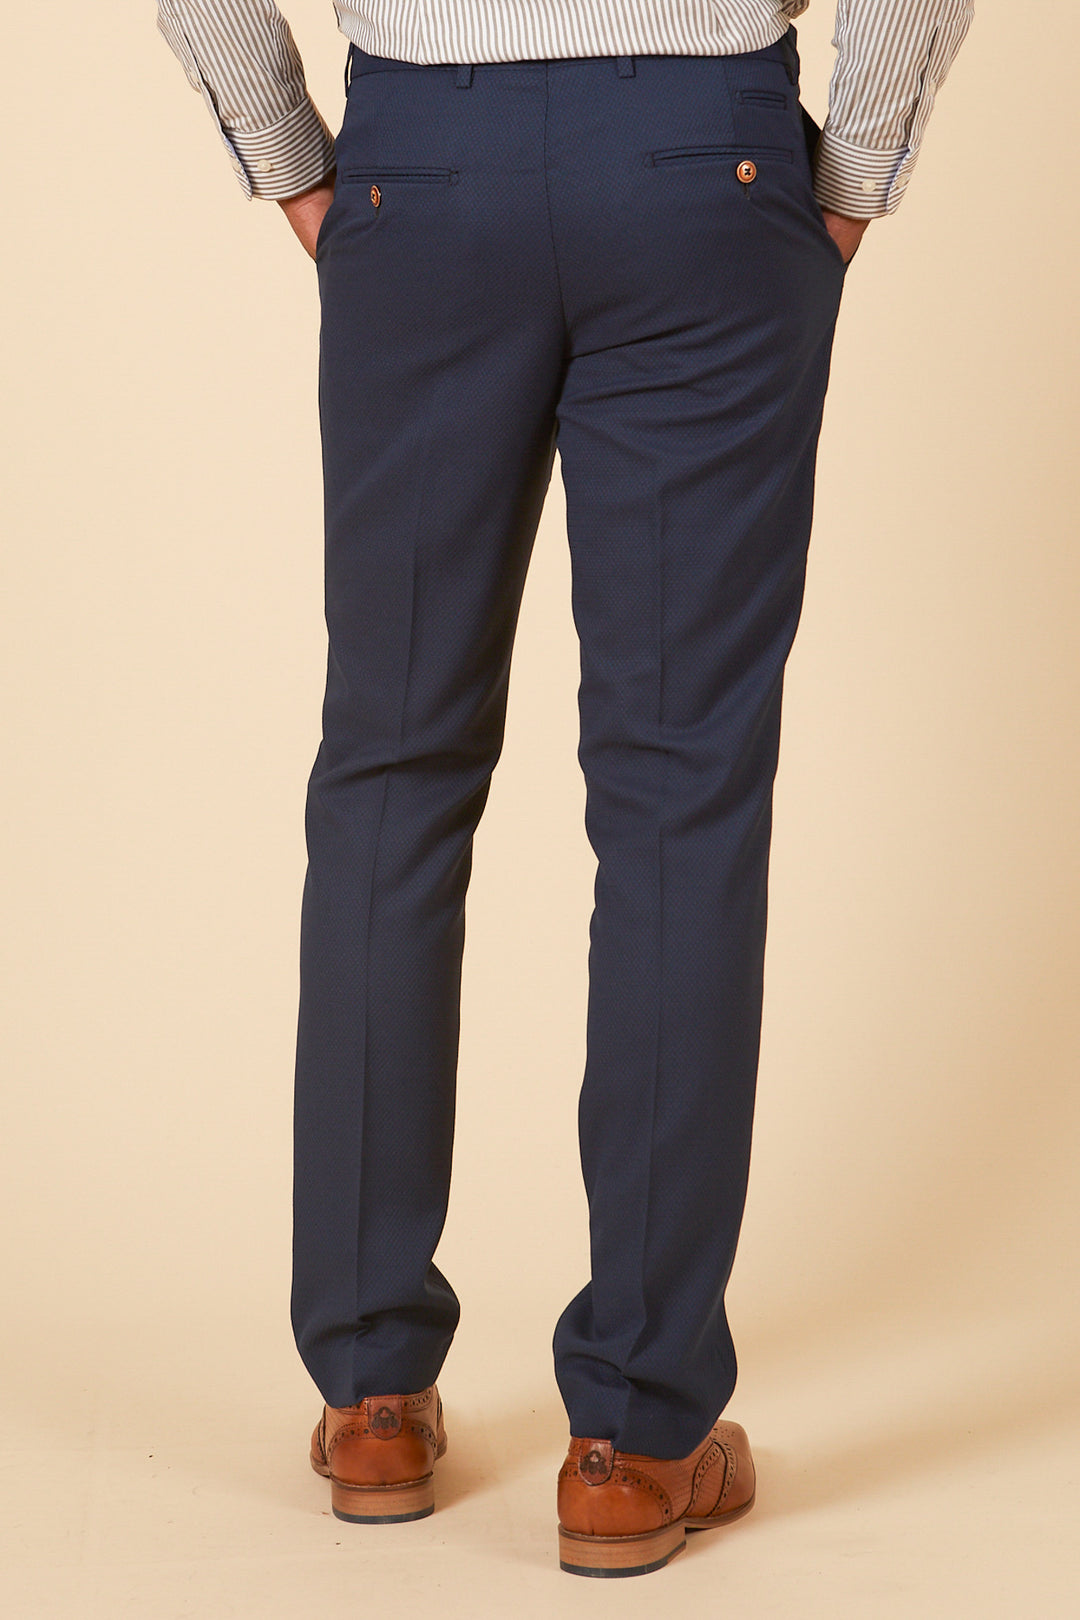 MAX - Royal Blue Trousers with Contrast Buttons